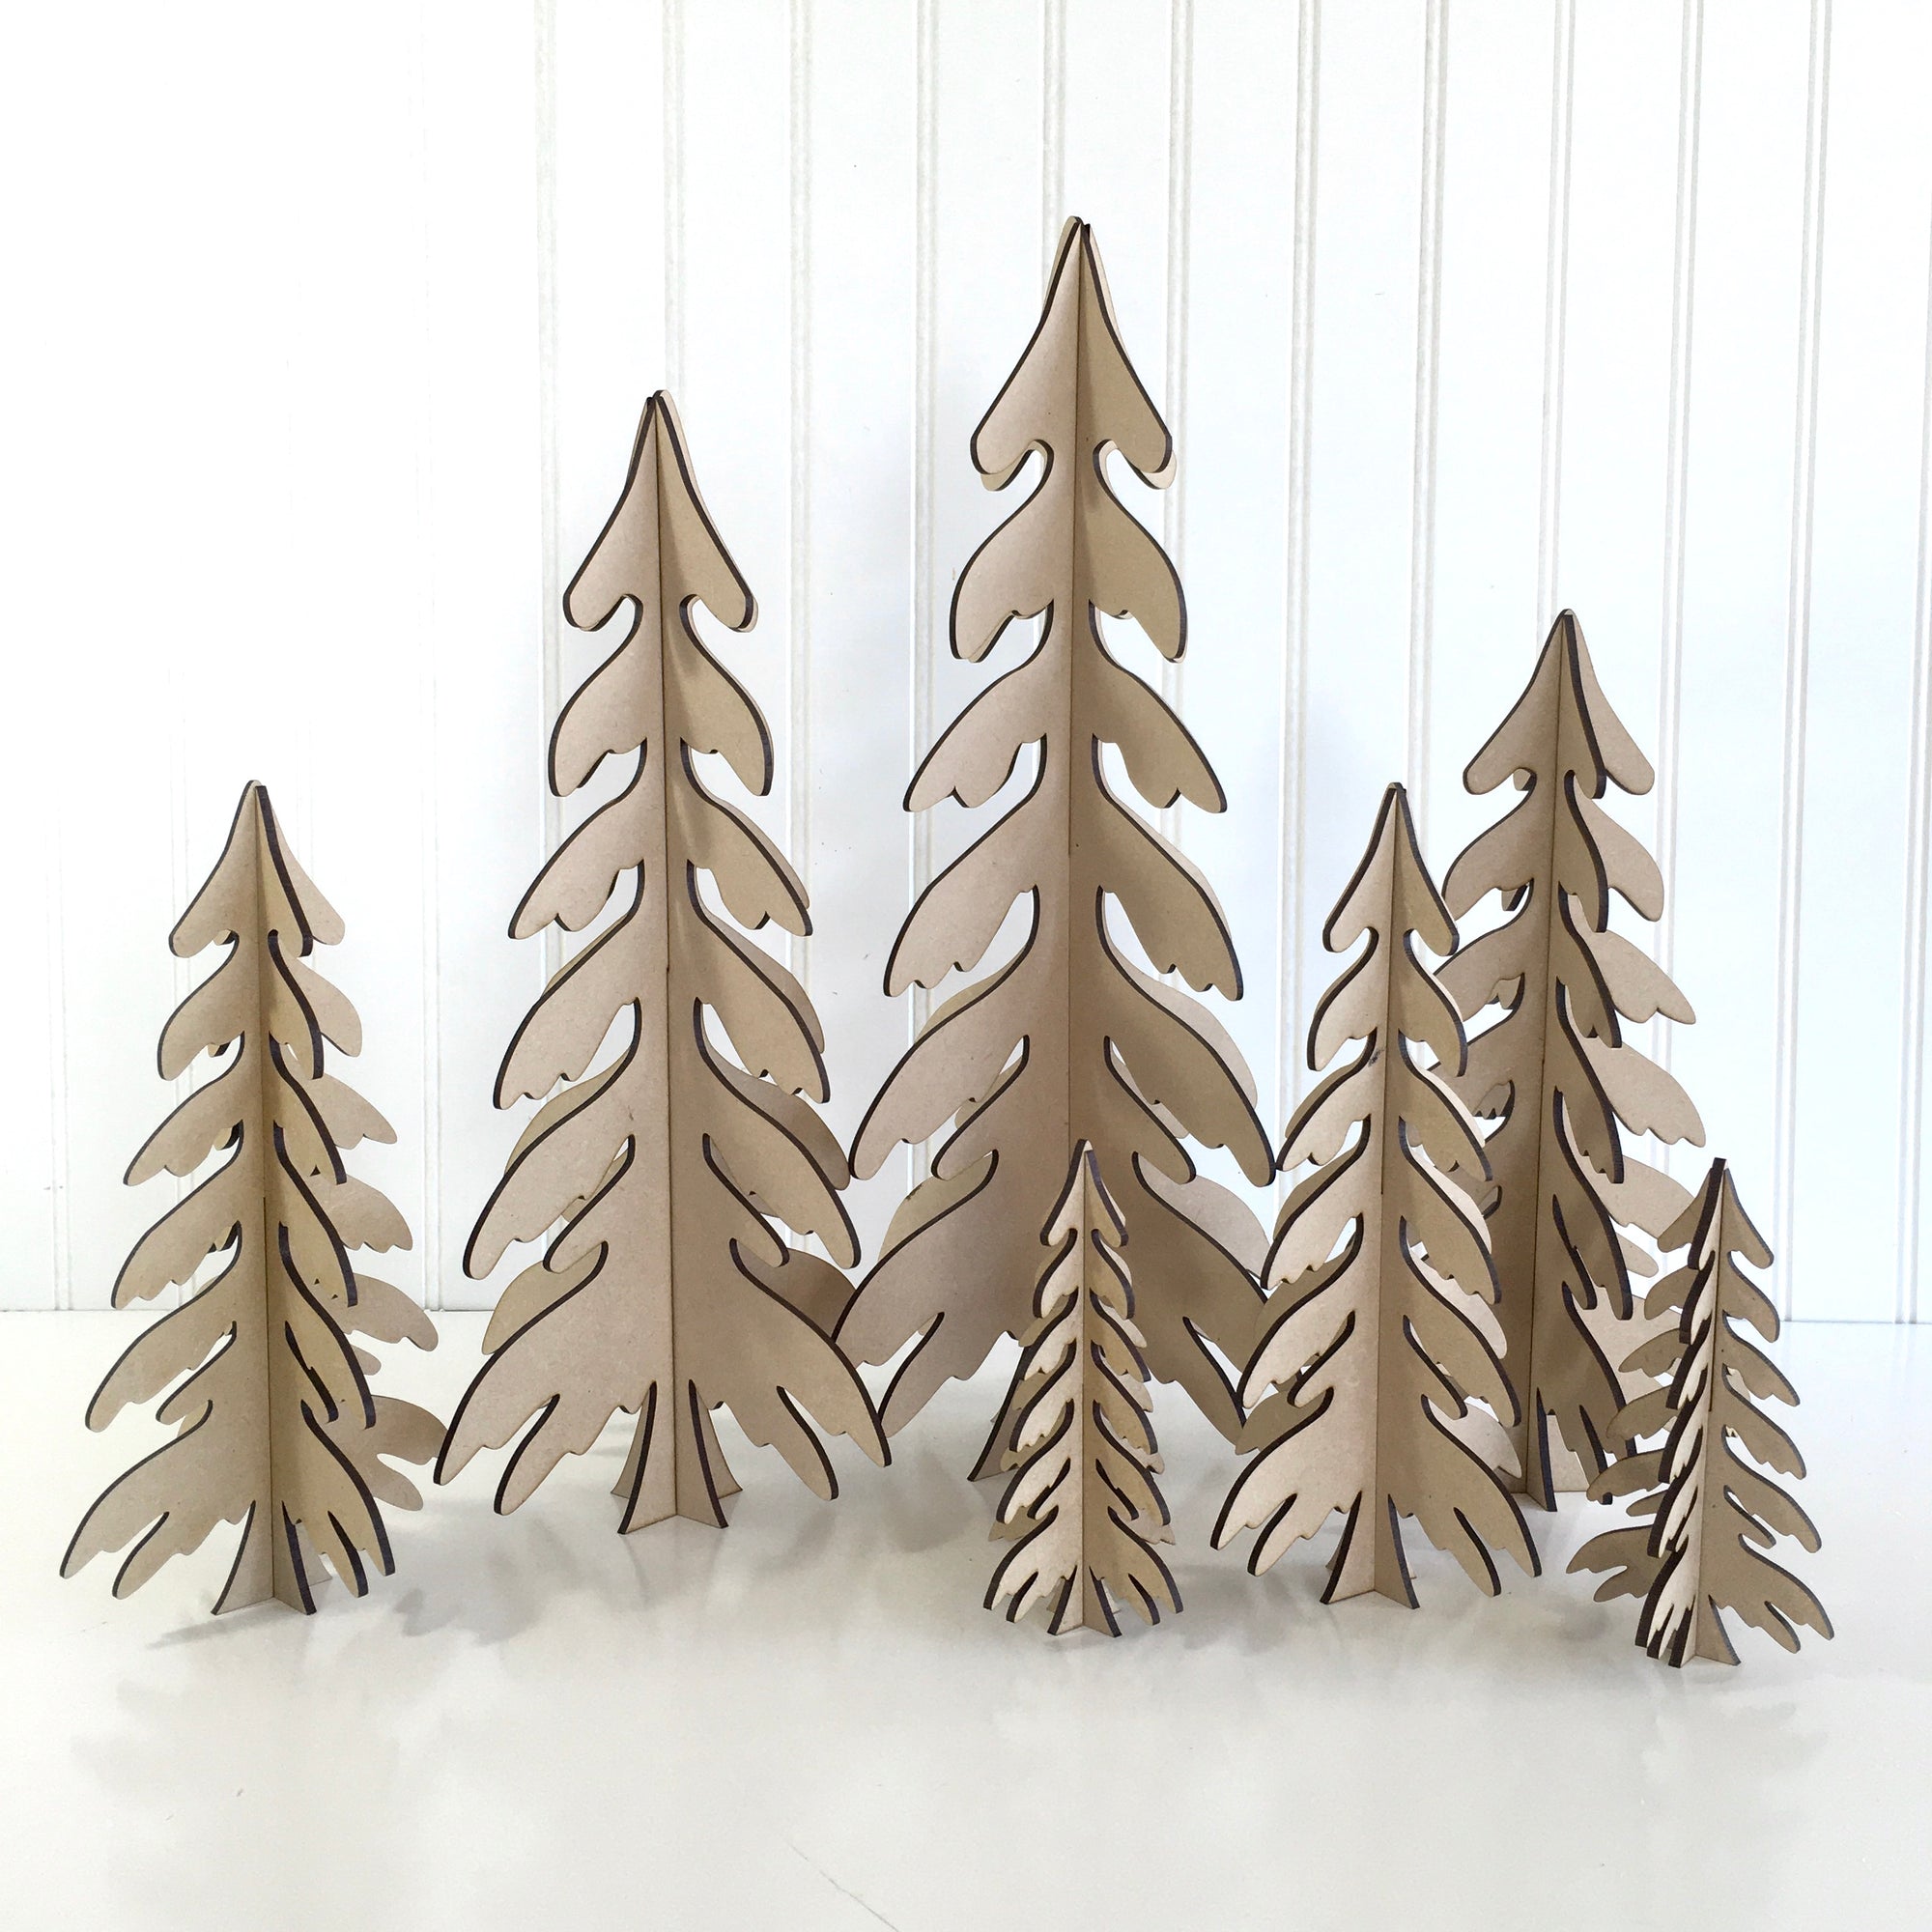 Wood Dimensional Christmas trees for fireplace, mantel, tables, or shelves.  wood Christmas tree decoartions.  Handmade christmas trees, holiday wood decor, christmas crafts, 3D Christmas trees, 3D Trees